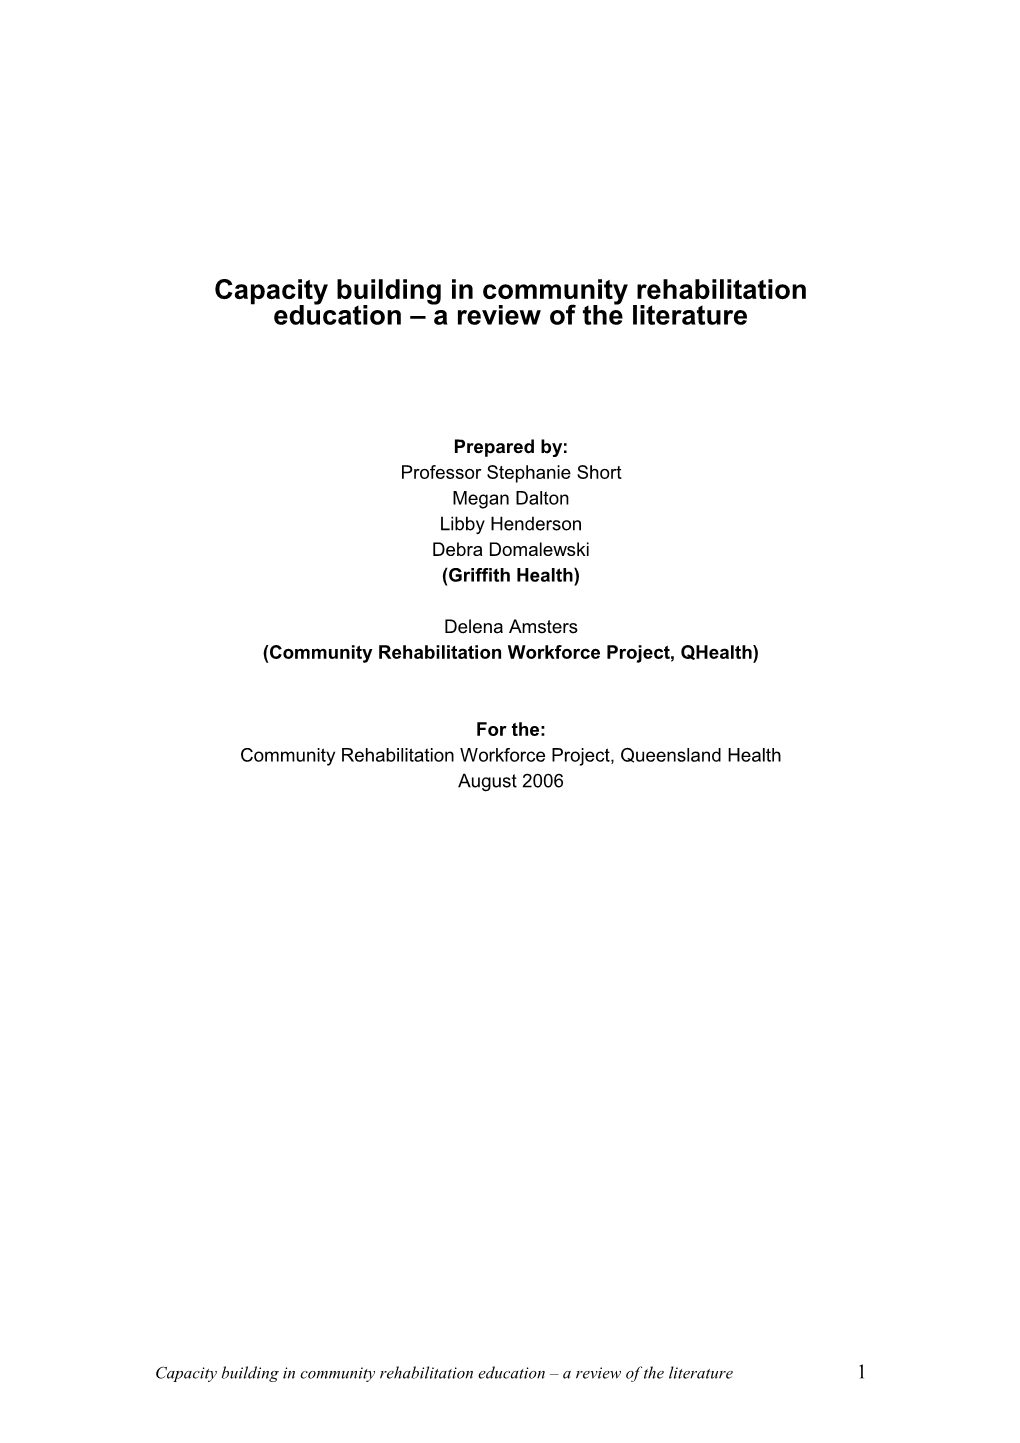 Capacity Building in CR Education a Review of the Literature